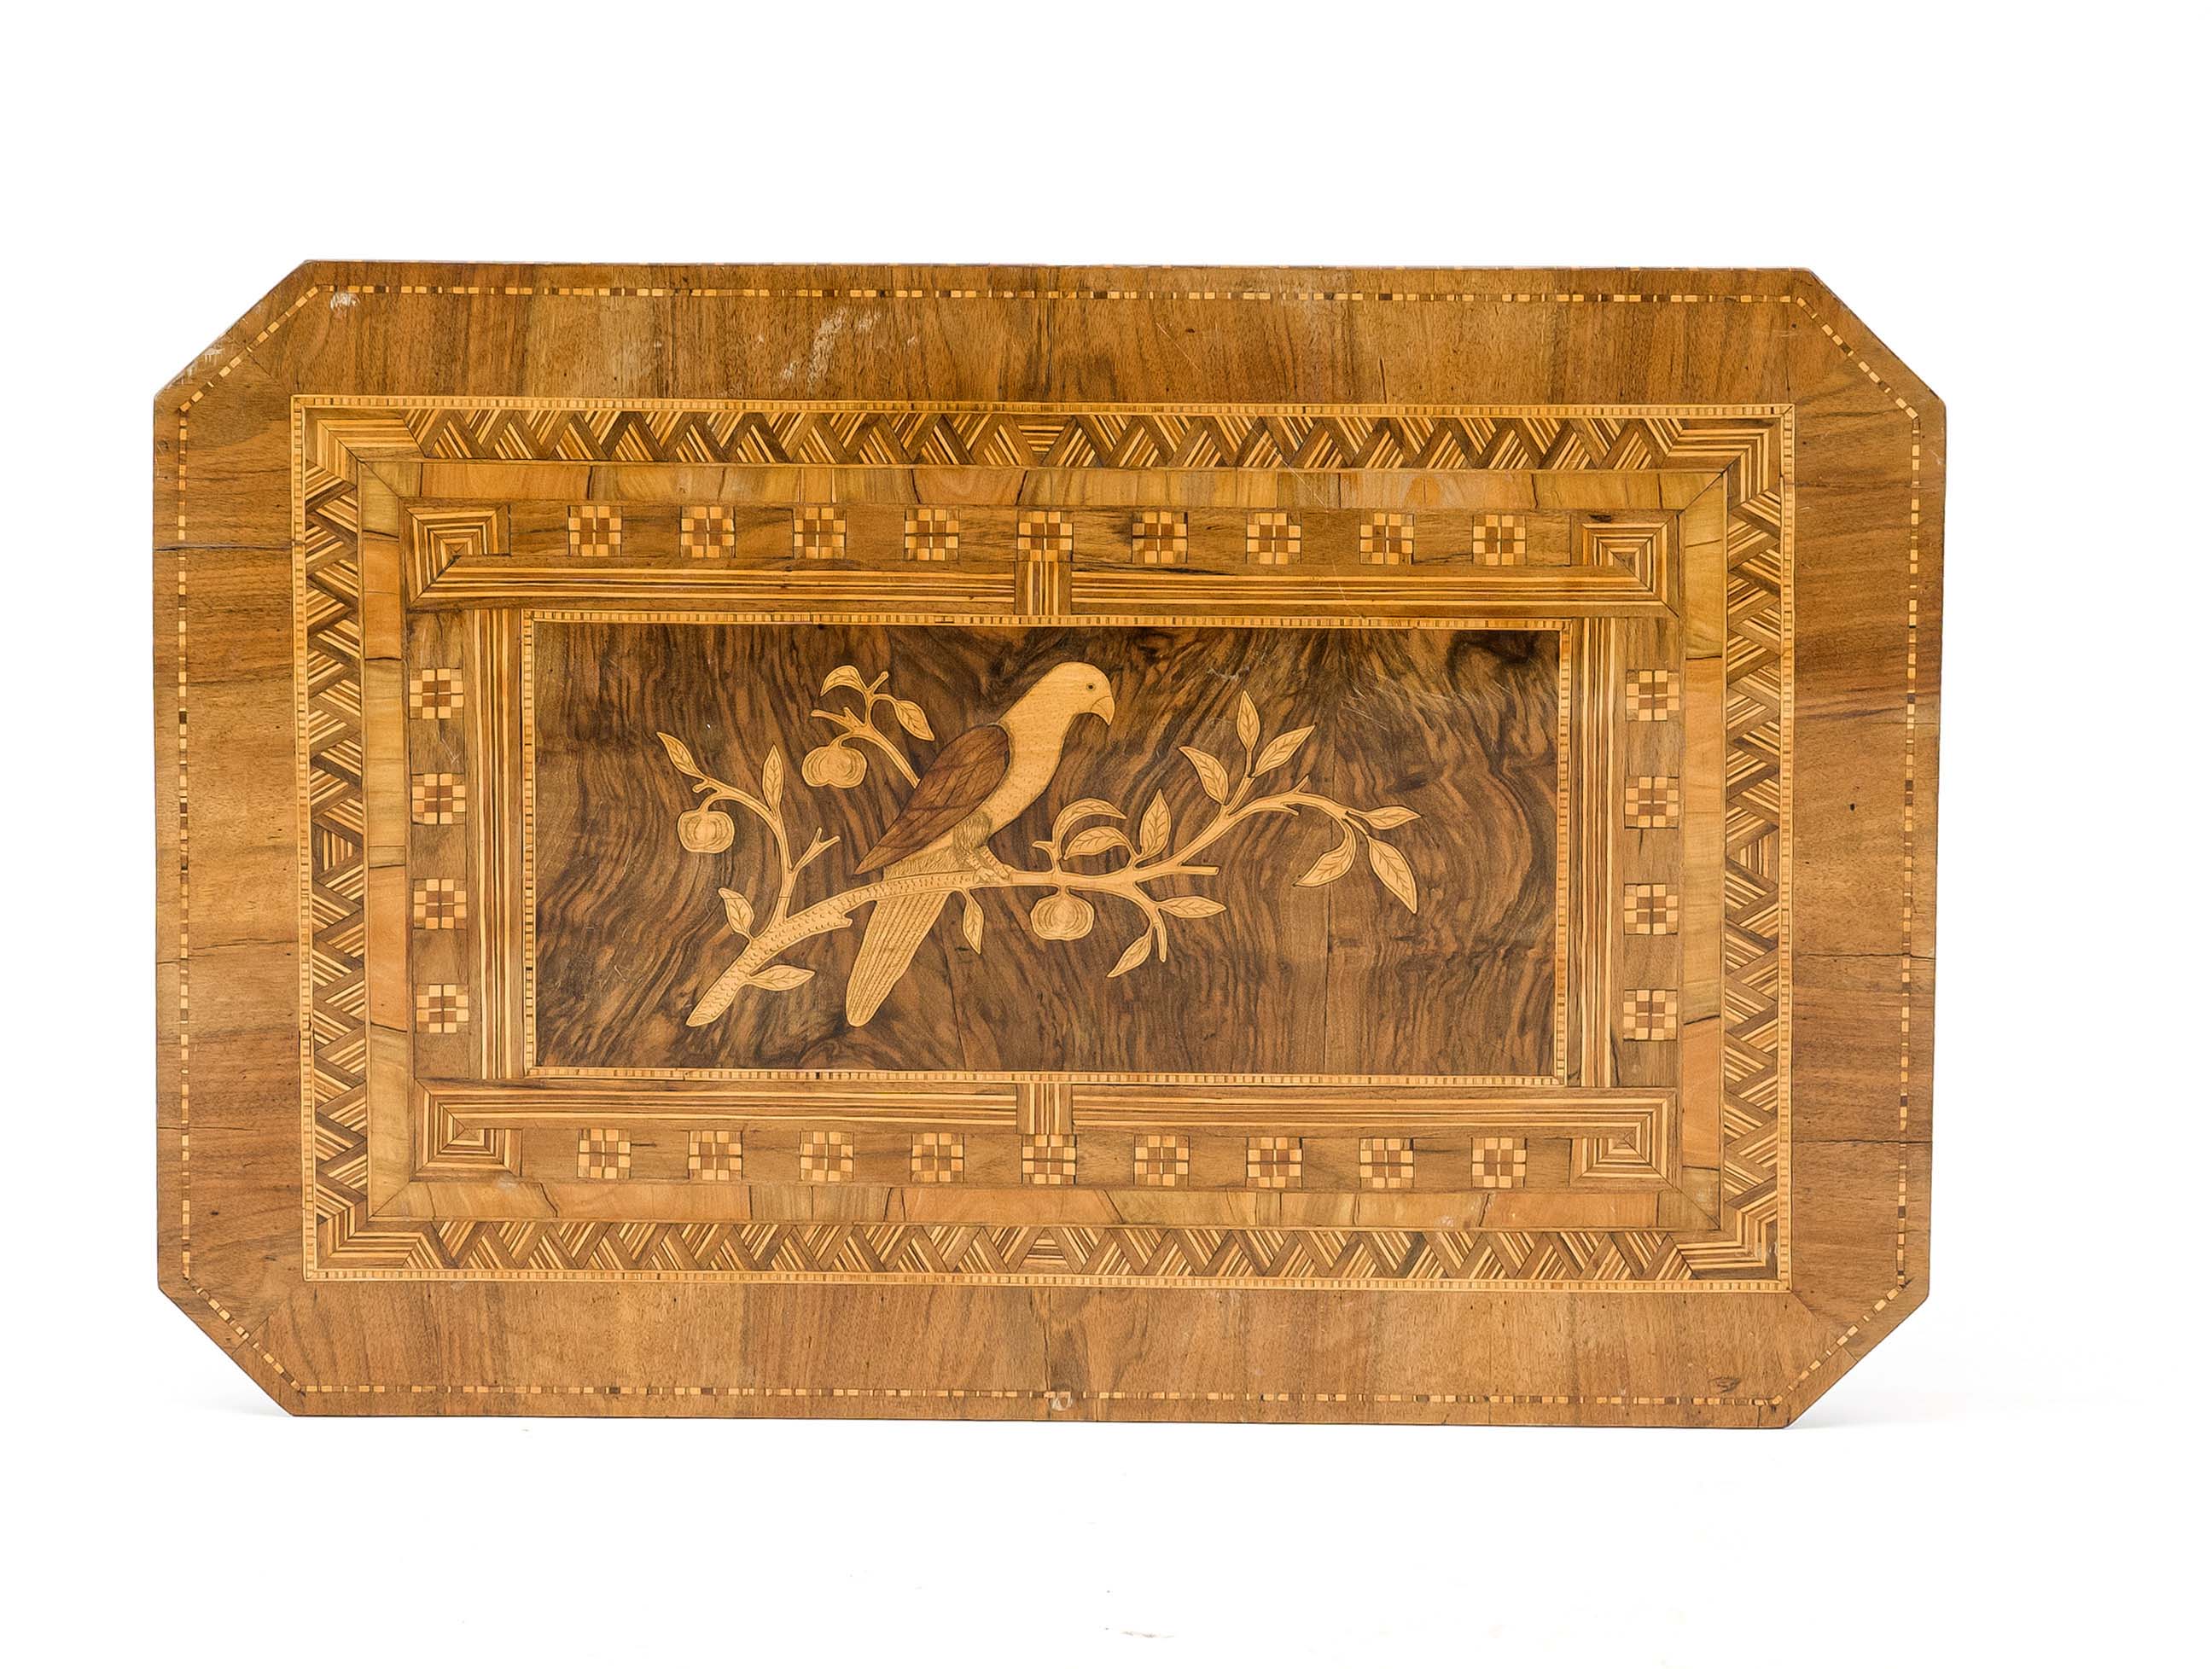 Viennese Biedermeier table, c. 1830, walnut and other precious woods veneered and inlaid, 77 x 80 - Image 2 of 2